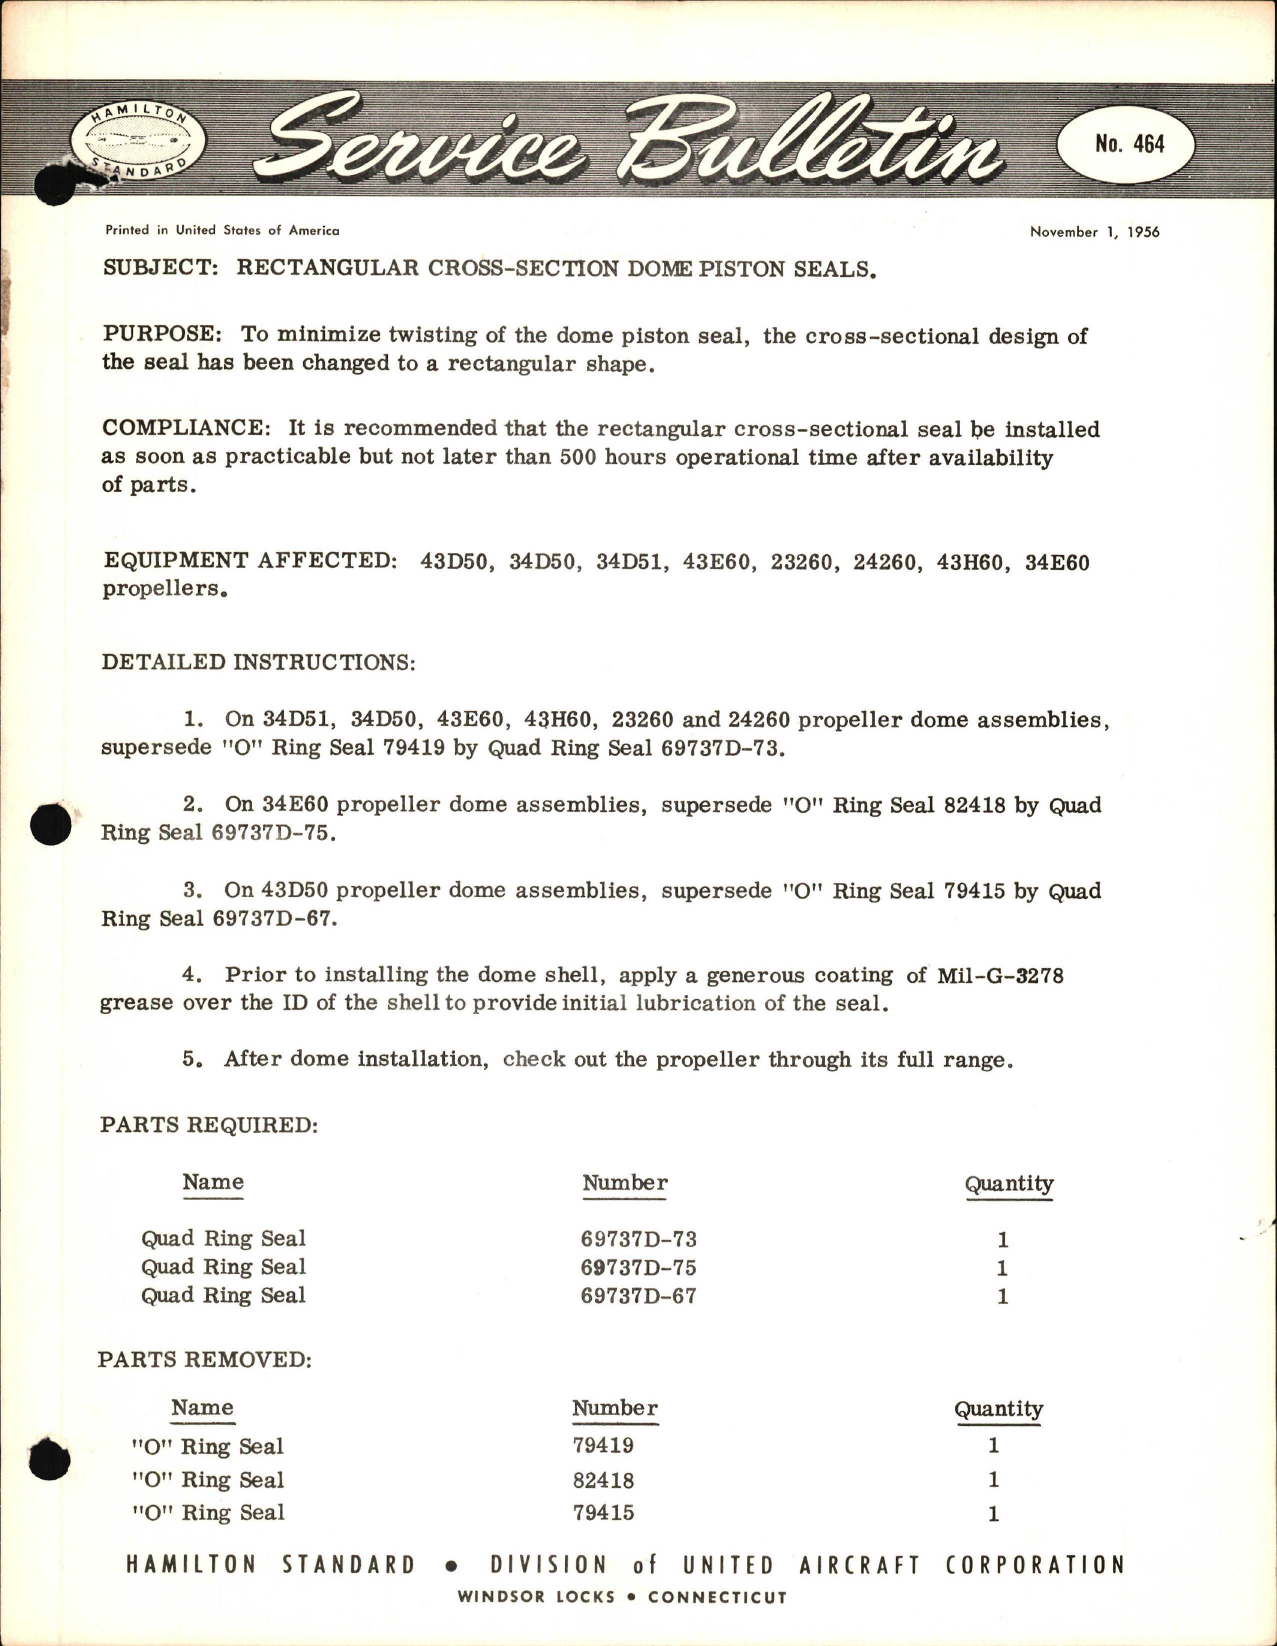 Sample page 1 from AirCorps Library document: Rectangular Cross-Section Dome Piston Seals